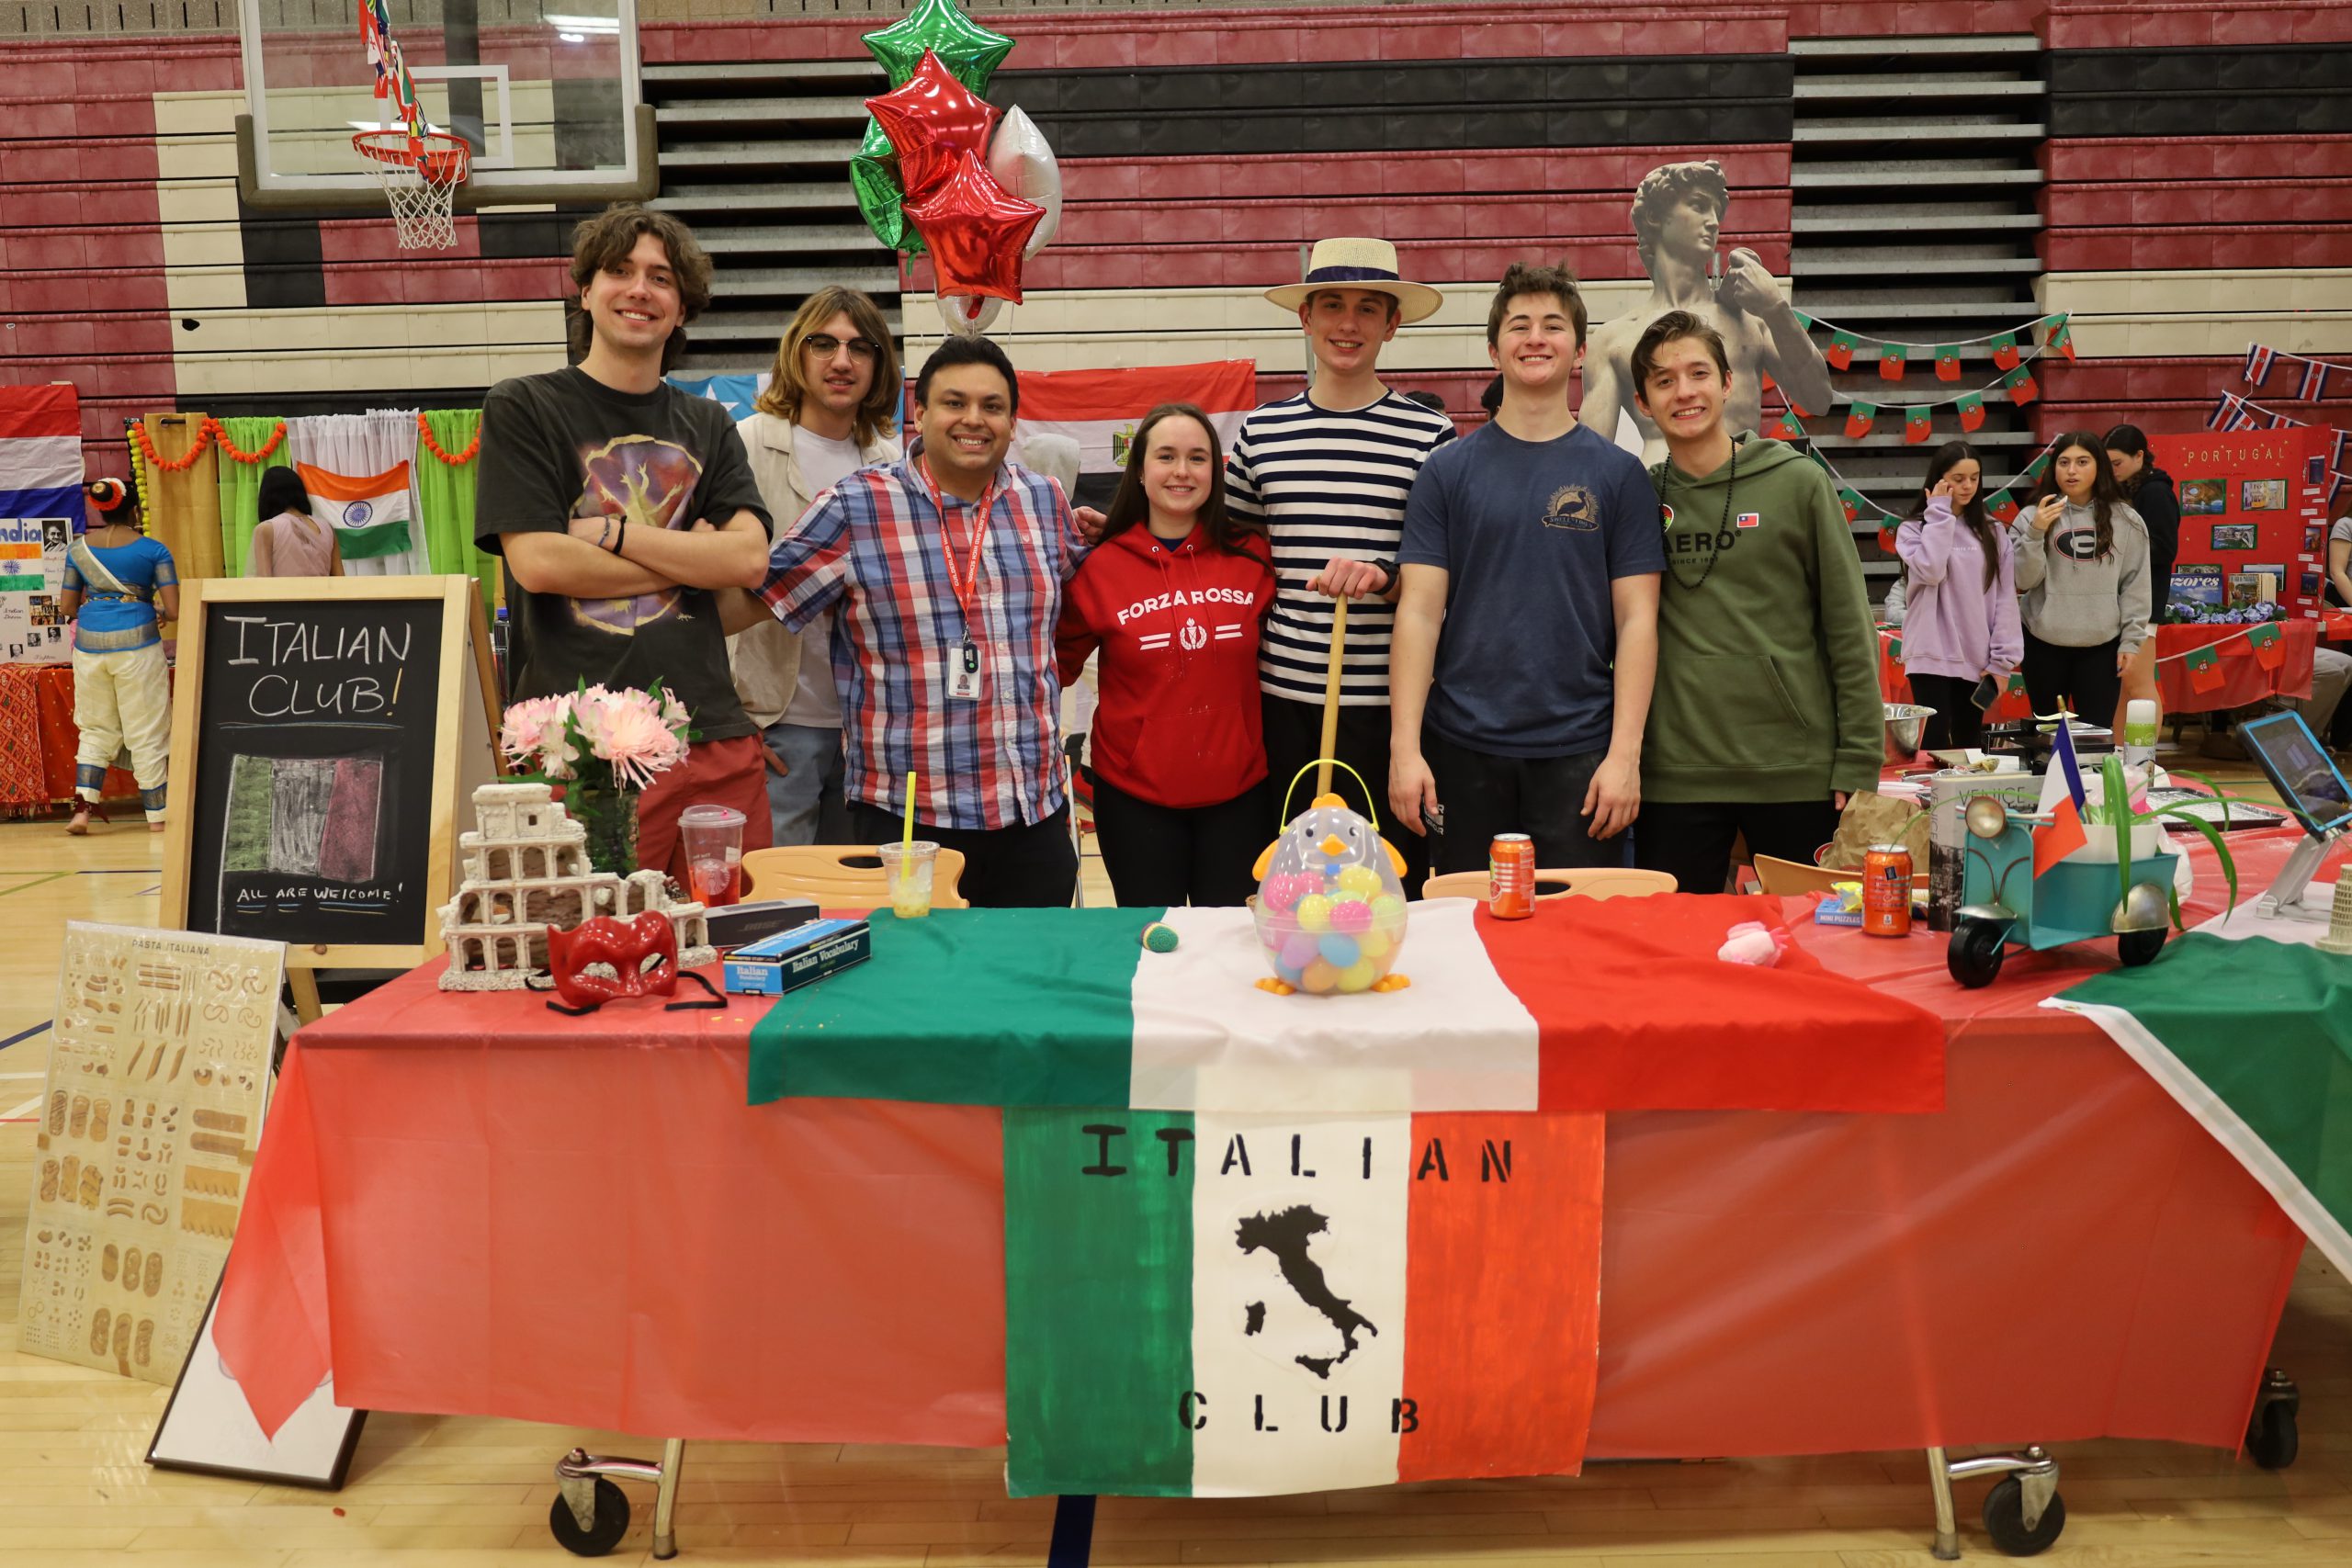 A group of students stand in a gymnasium behind a table with a red white and green tablecloth. A sign reads: Italian Club. The students are smiling. One is wearing a striped shirt and straw hat